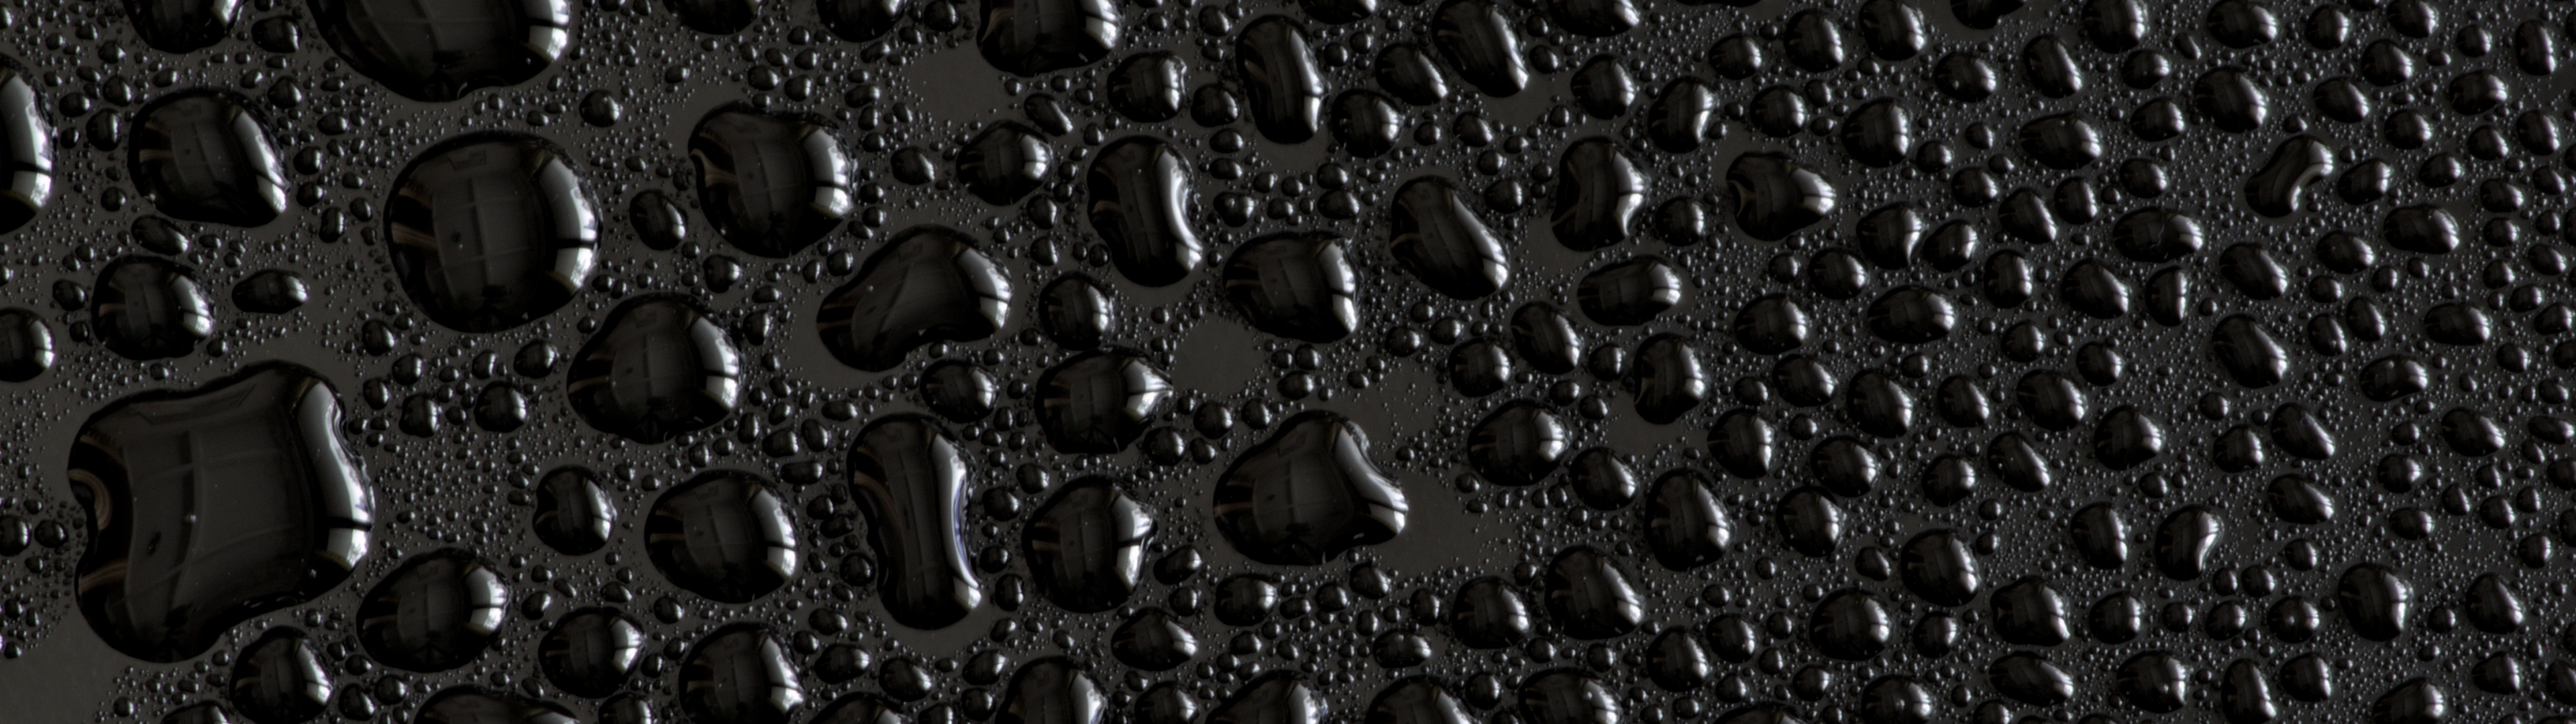 Water droplets Wallpaper 4K, Black background, Photography, #5488